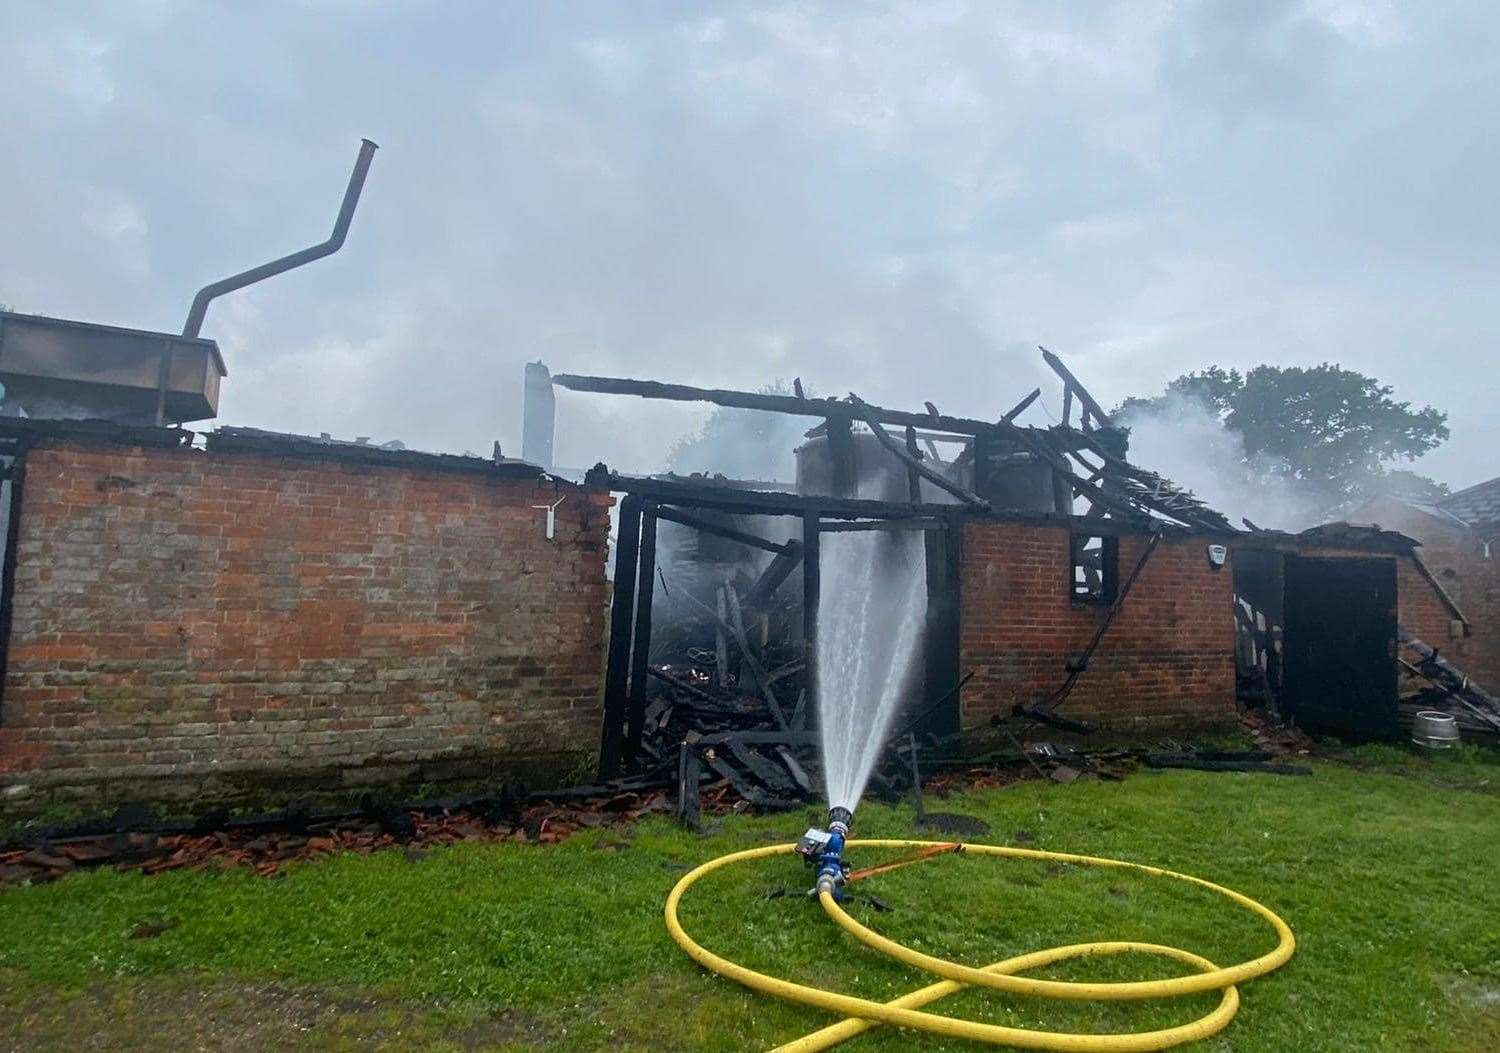 The Good Things Brewery in Tunbridge Wells burnt down after being struck by lightning